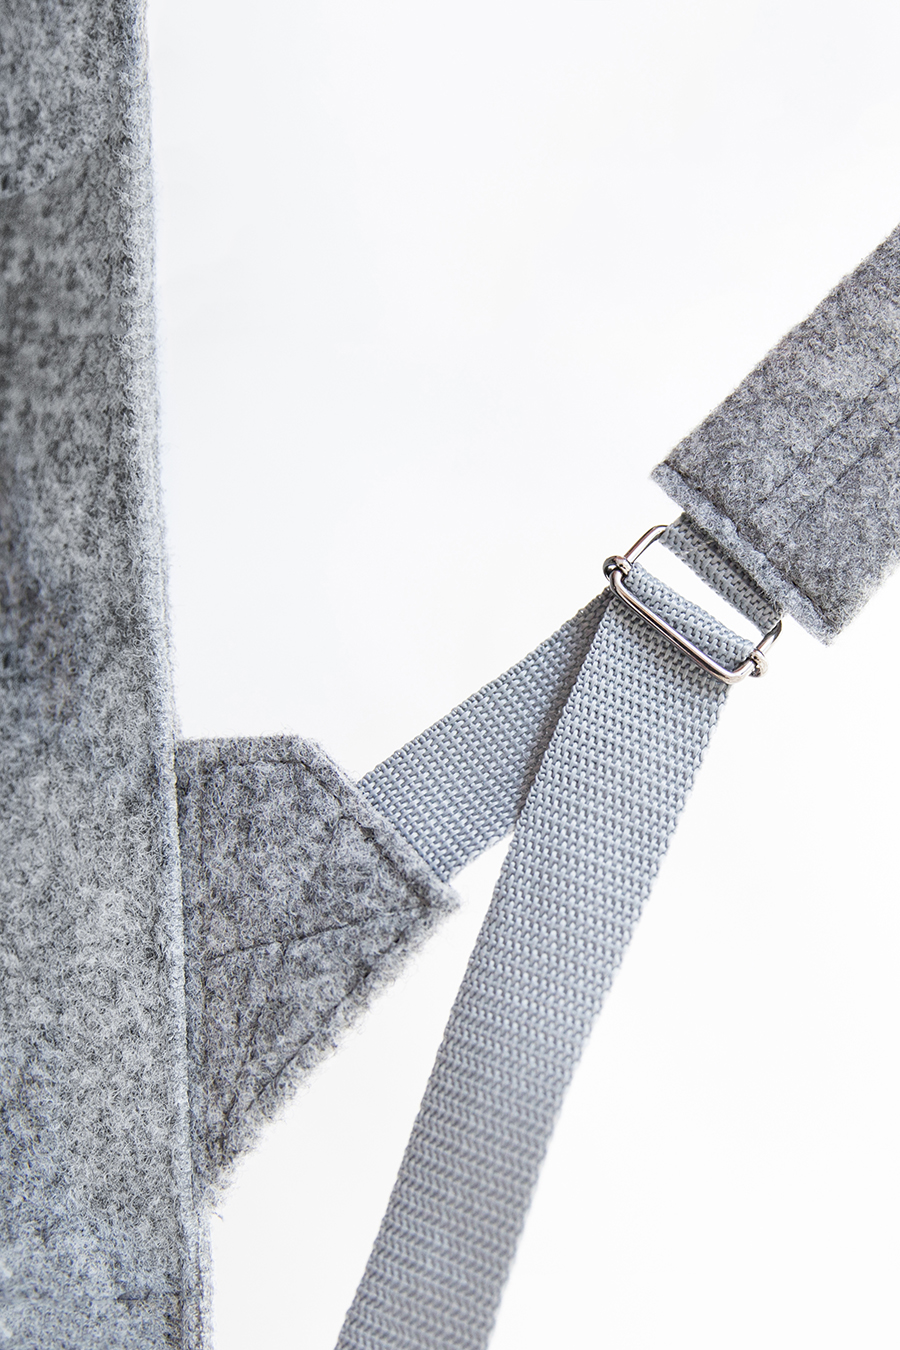 a close up of a tie on a white background.